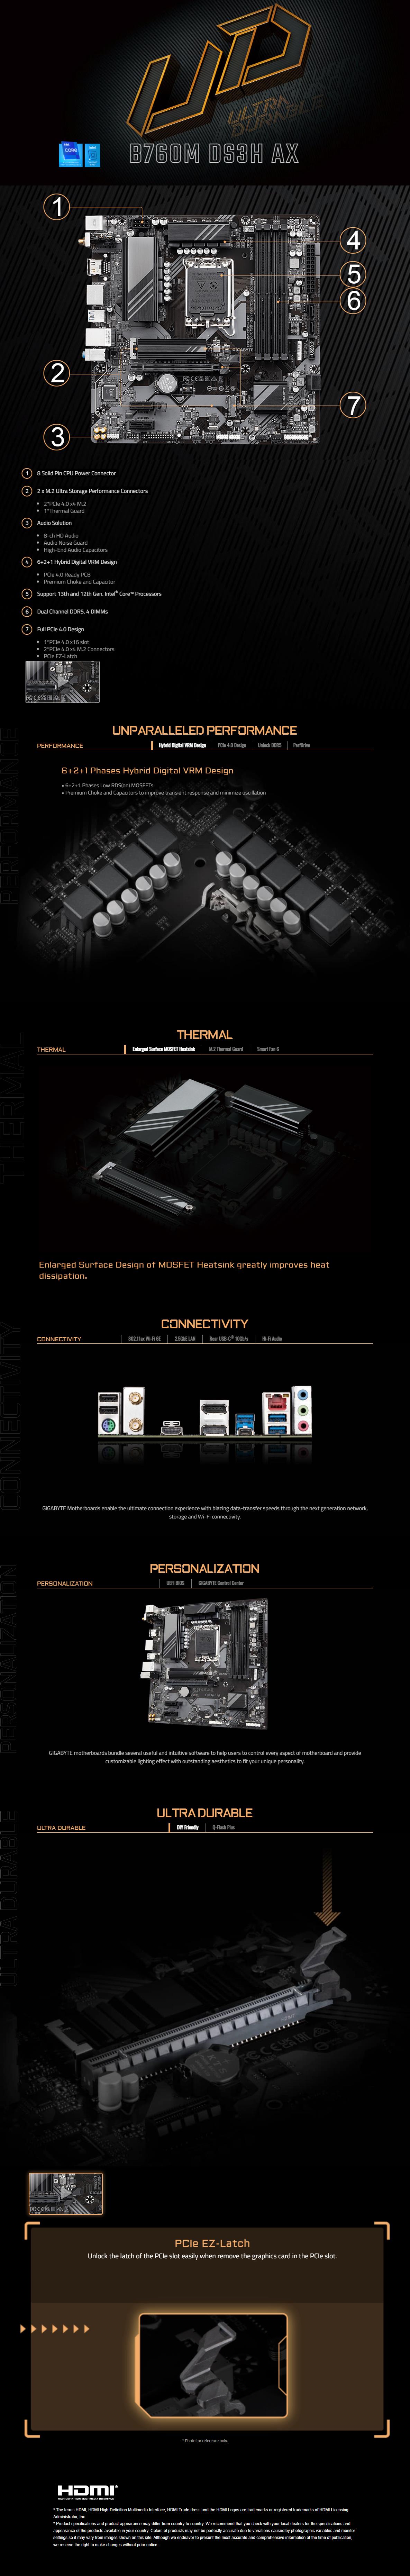 A large marketing image providing additional information about the product Gigabyte B760M DS3H AX LGA1700 mATX Desktop Motherboard - Additional alt info not provided